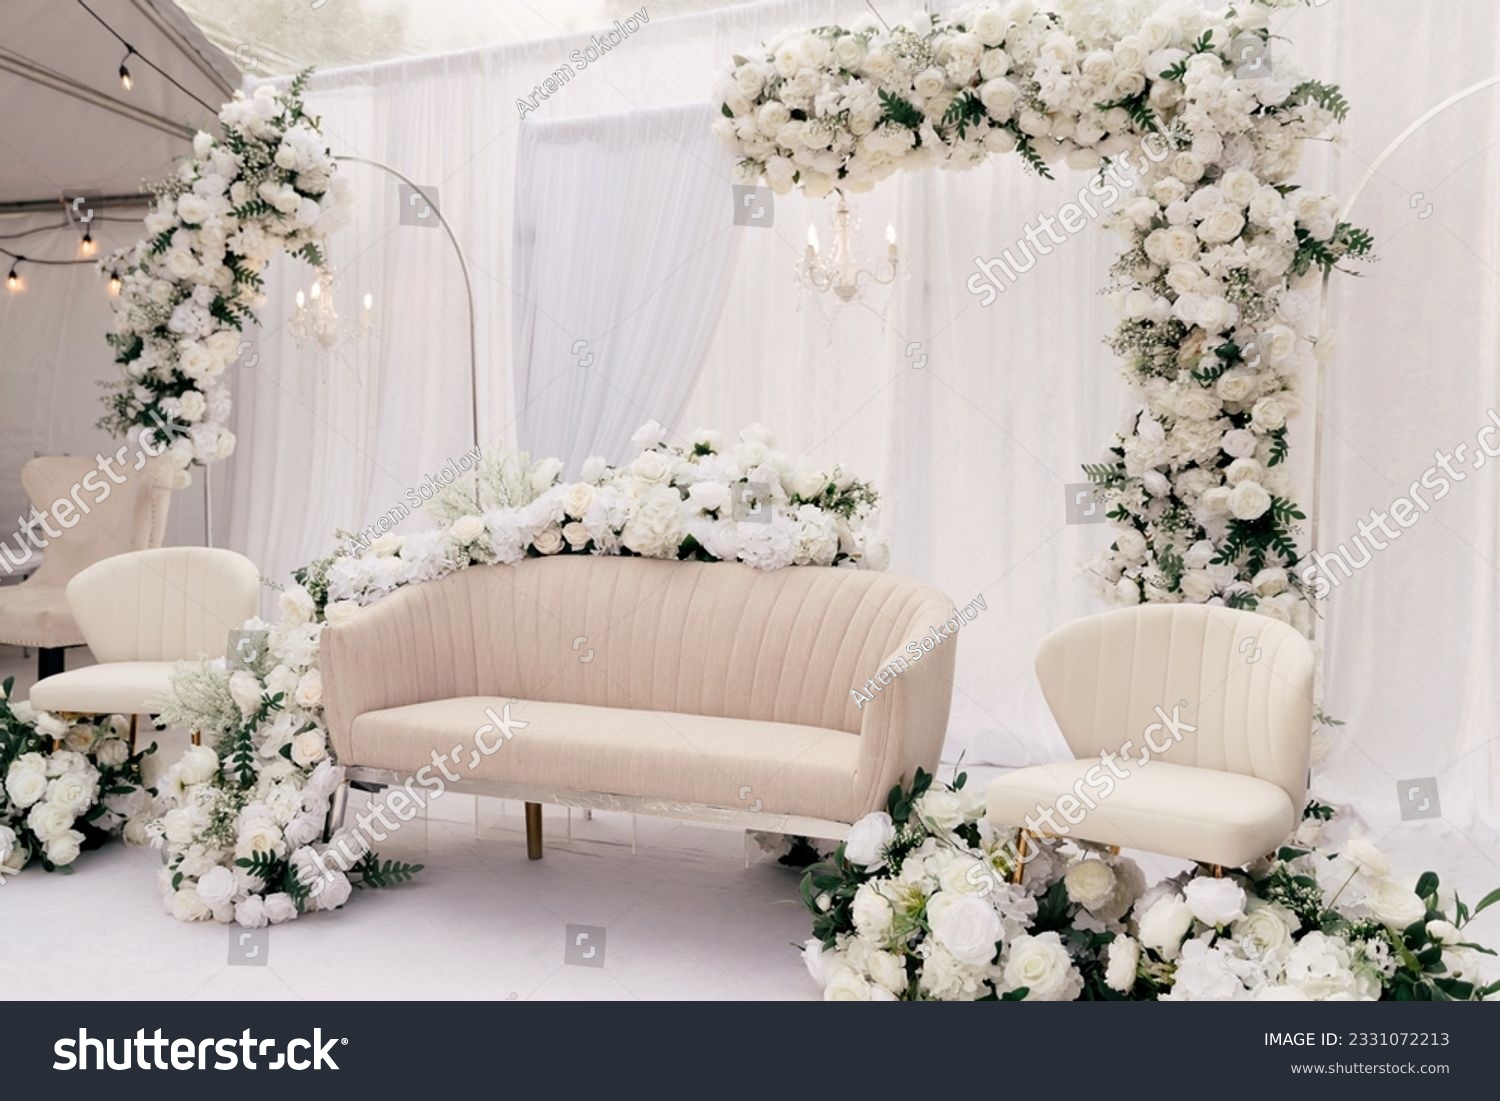 Beautiful decor for the wedding ceremony in the form of a sofa and white flowers on the ceremonial arch. Light furniture in the form of a sofa and chairs in a white tent is decorated with white roses #2331072213